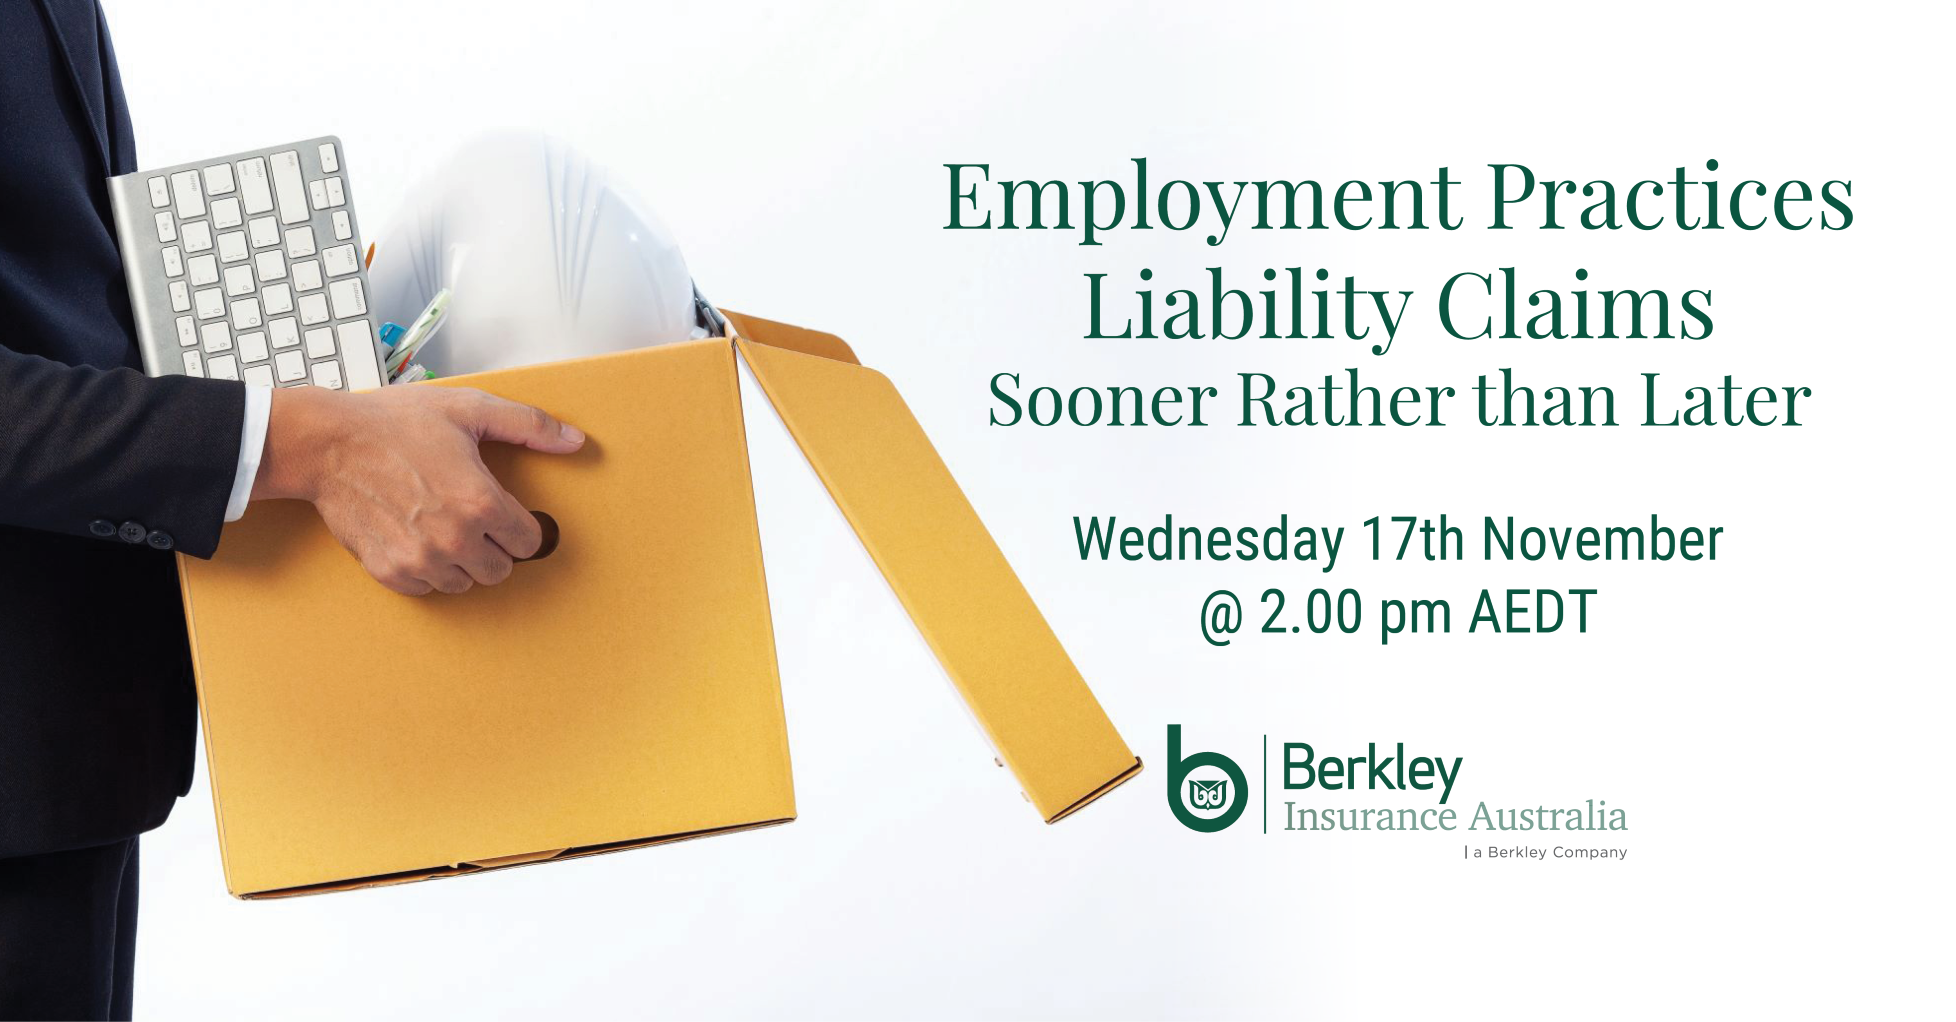 Employment Practices Liability Claims Sooner Rather than Later